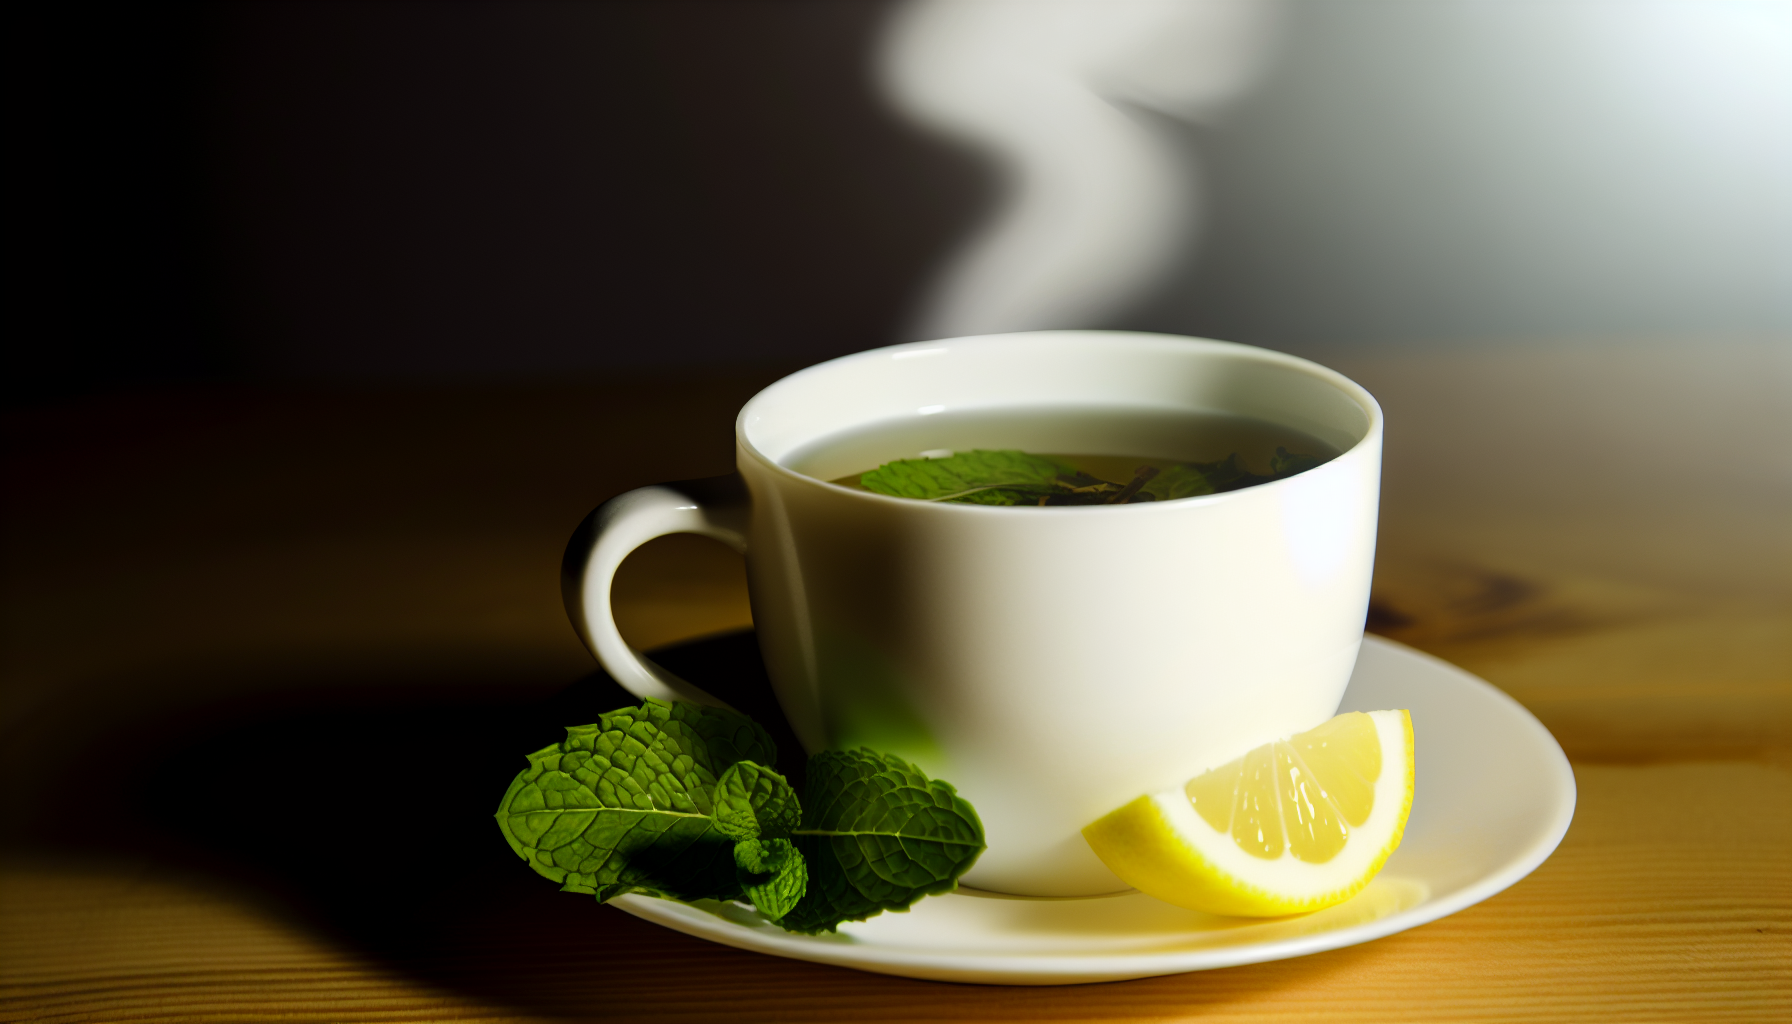 A cup of refreshing peppermint tea with loose leaf peppermint and a slice of lemon